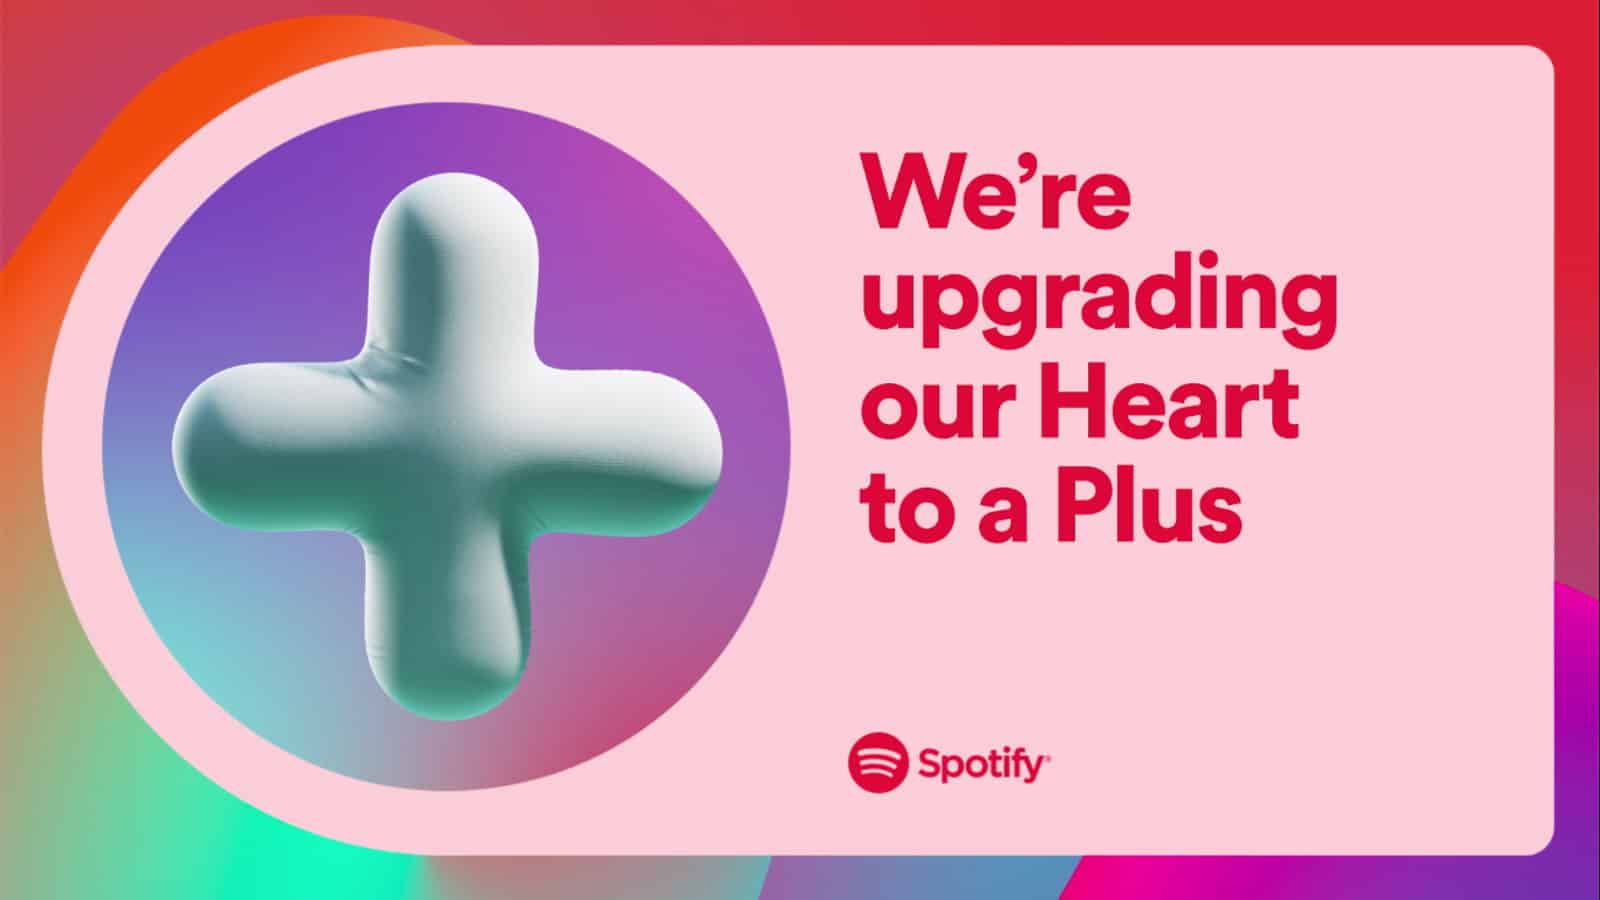 Spotify is introducing a new and improved “plus” button in place of its heart icon